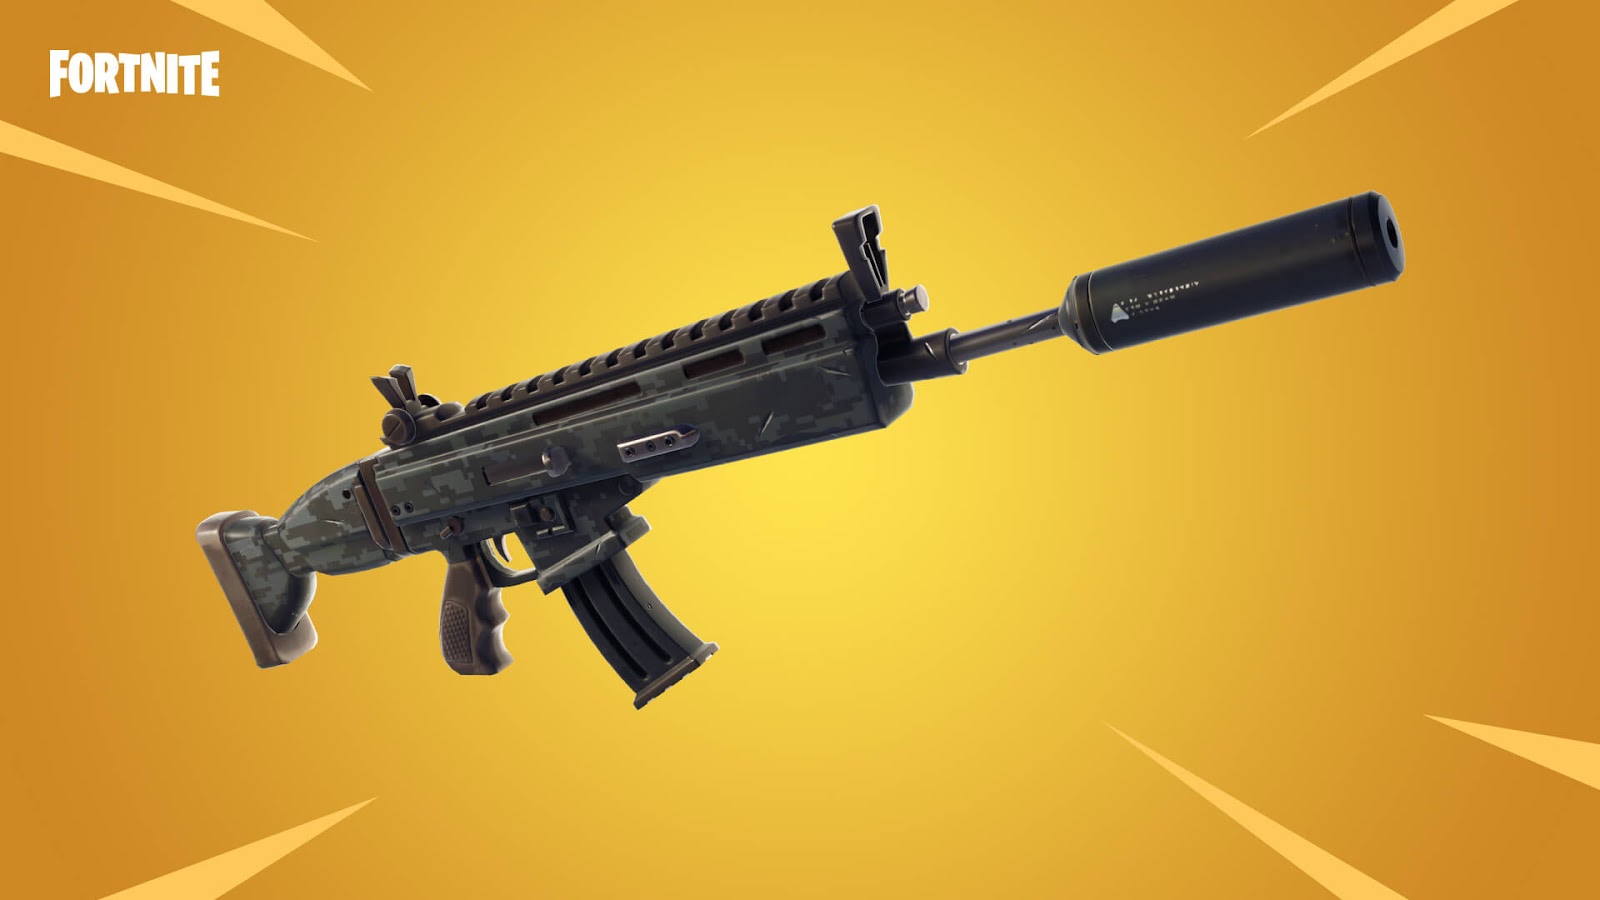 Fortnite V5.40 Content Update Patch Notes - Suppressed Assault Rifle Added, Drum Gun Vaulted